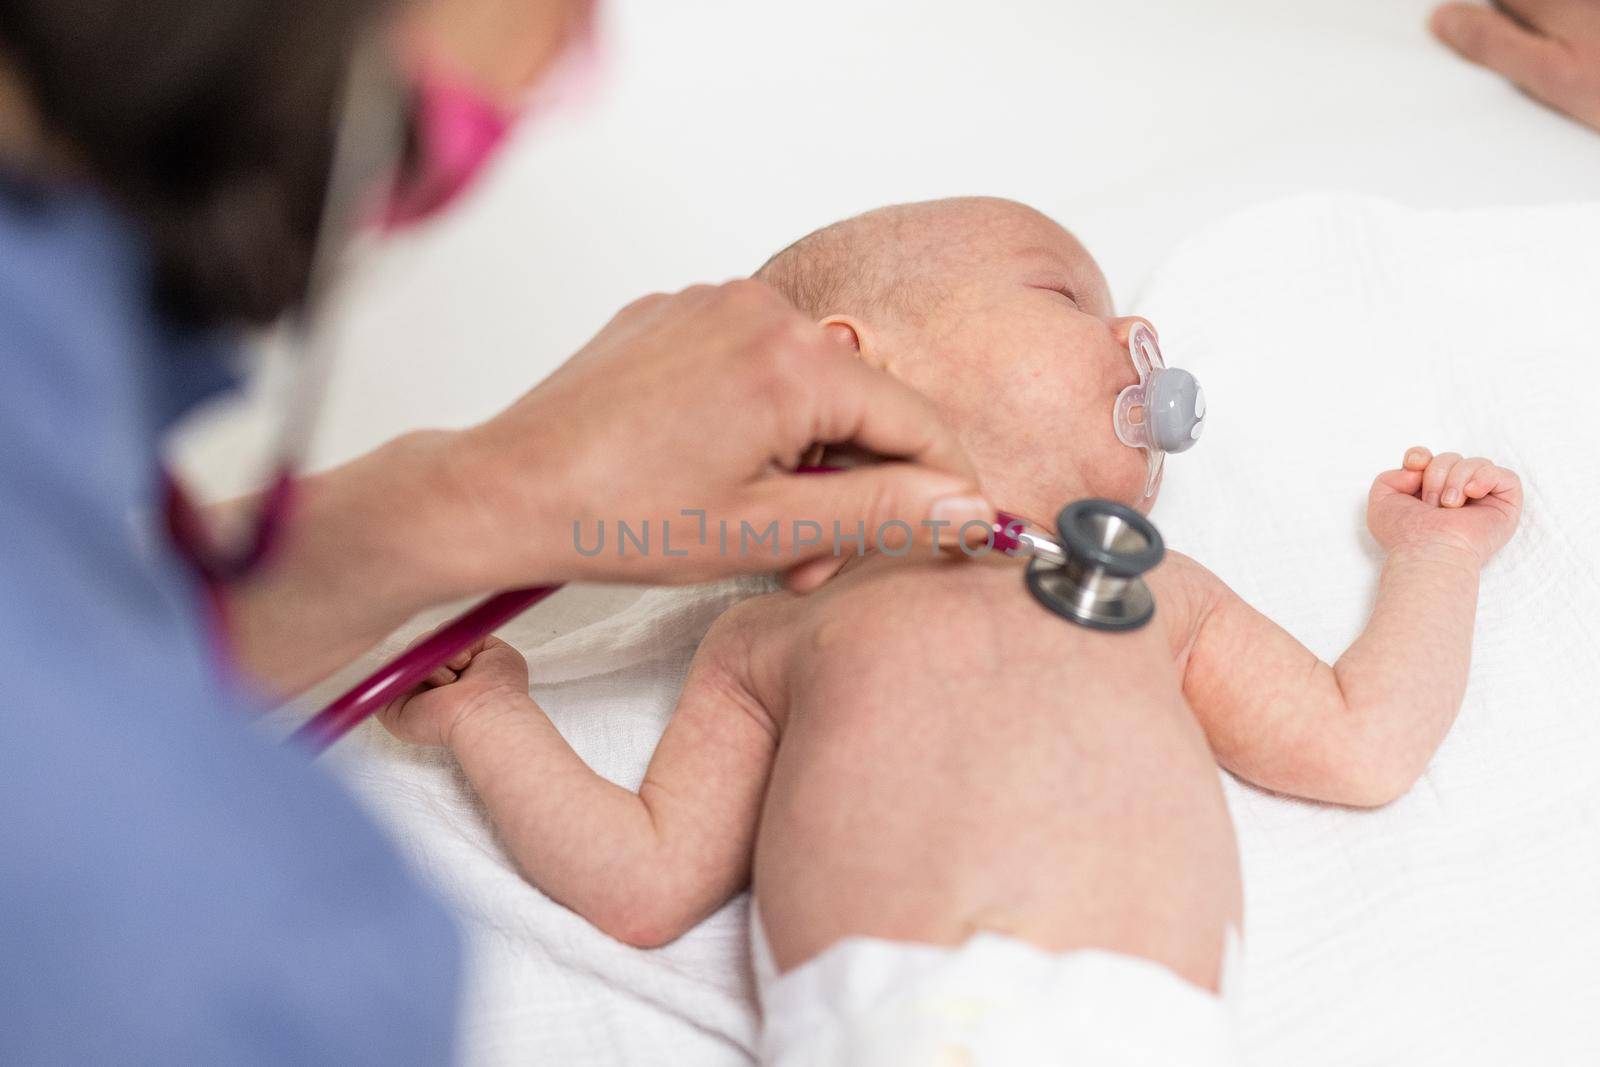 Baby lying on his back as his doctor examines him during a standard medical checkup by kasto